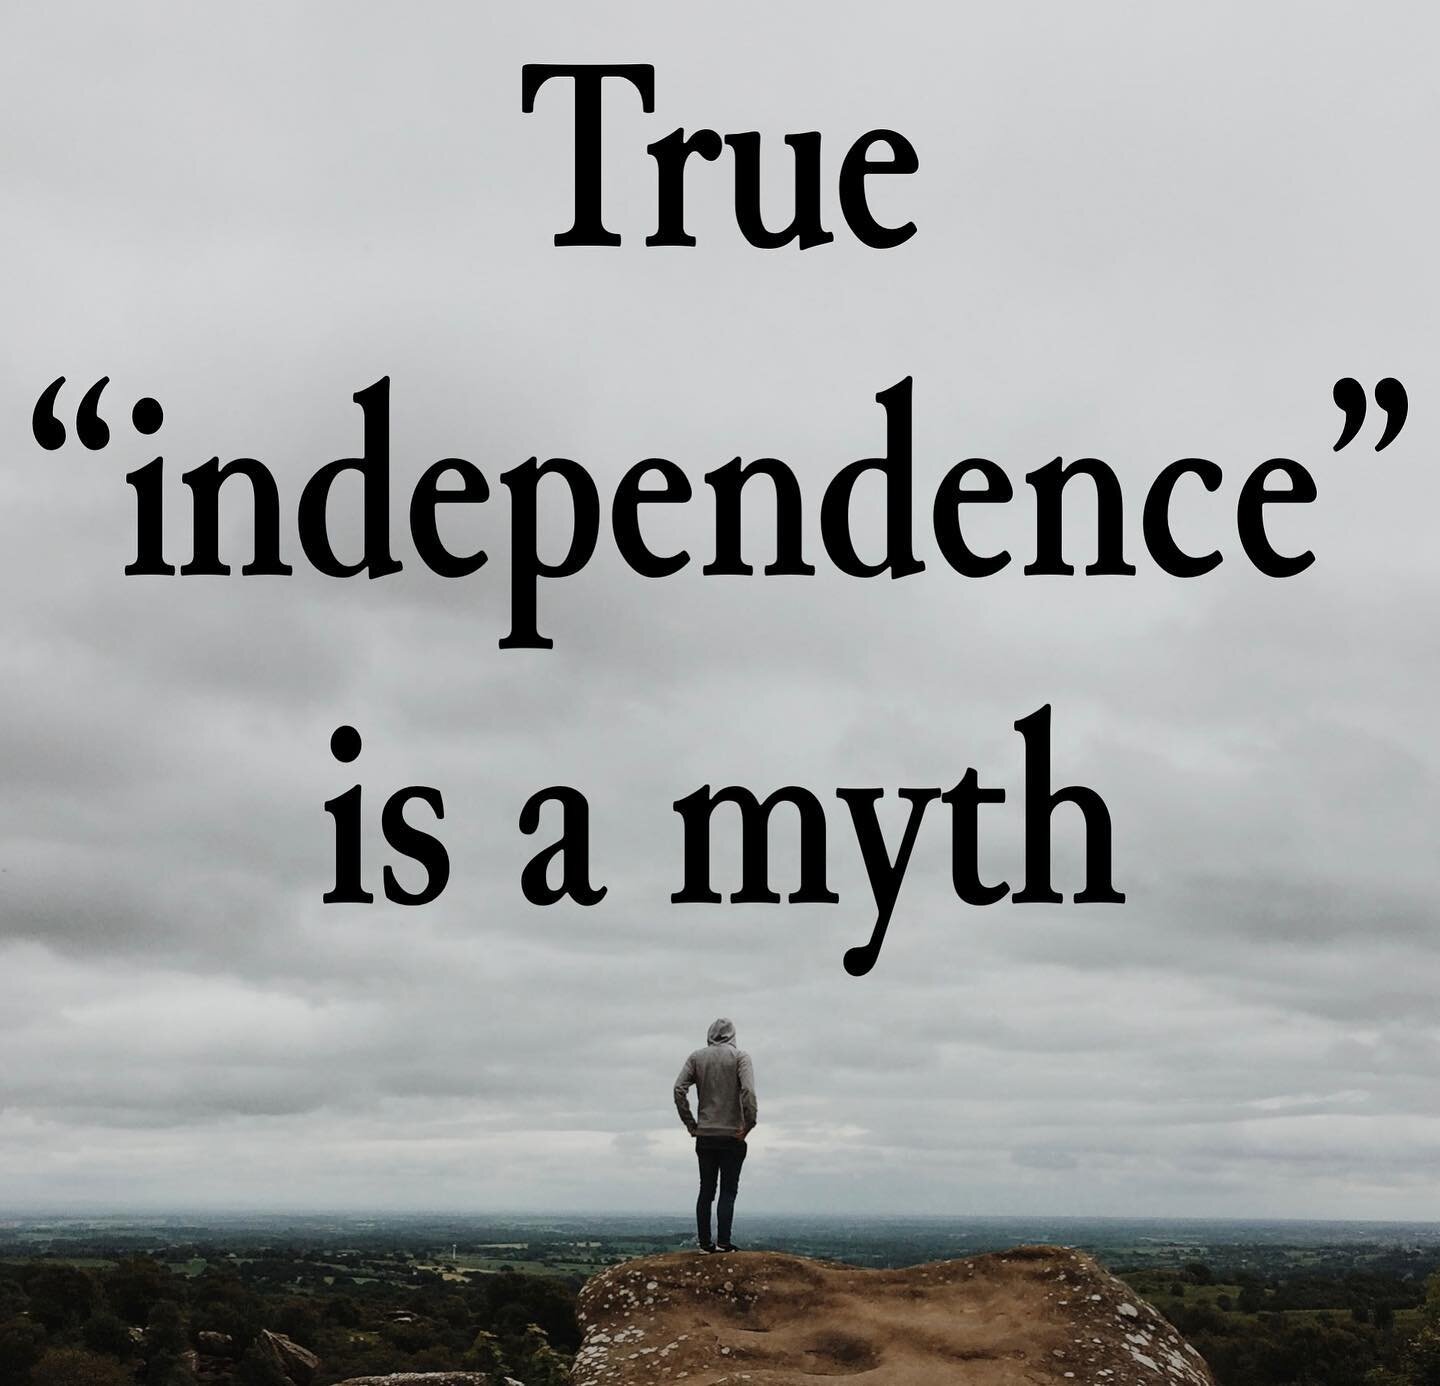 True &ldquo;independence&rdquo; is a myth. 

Many stroke survivors struggle to become &ldquo;independent&rdquo; again after their stroke, but we all need each other. We are all dependent in certain ways.

Here is a great quote about interdependence &